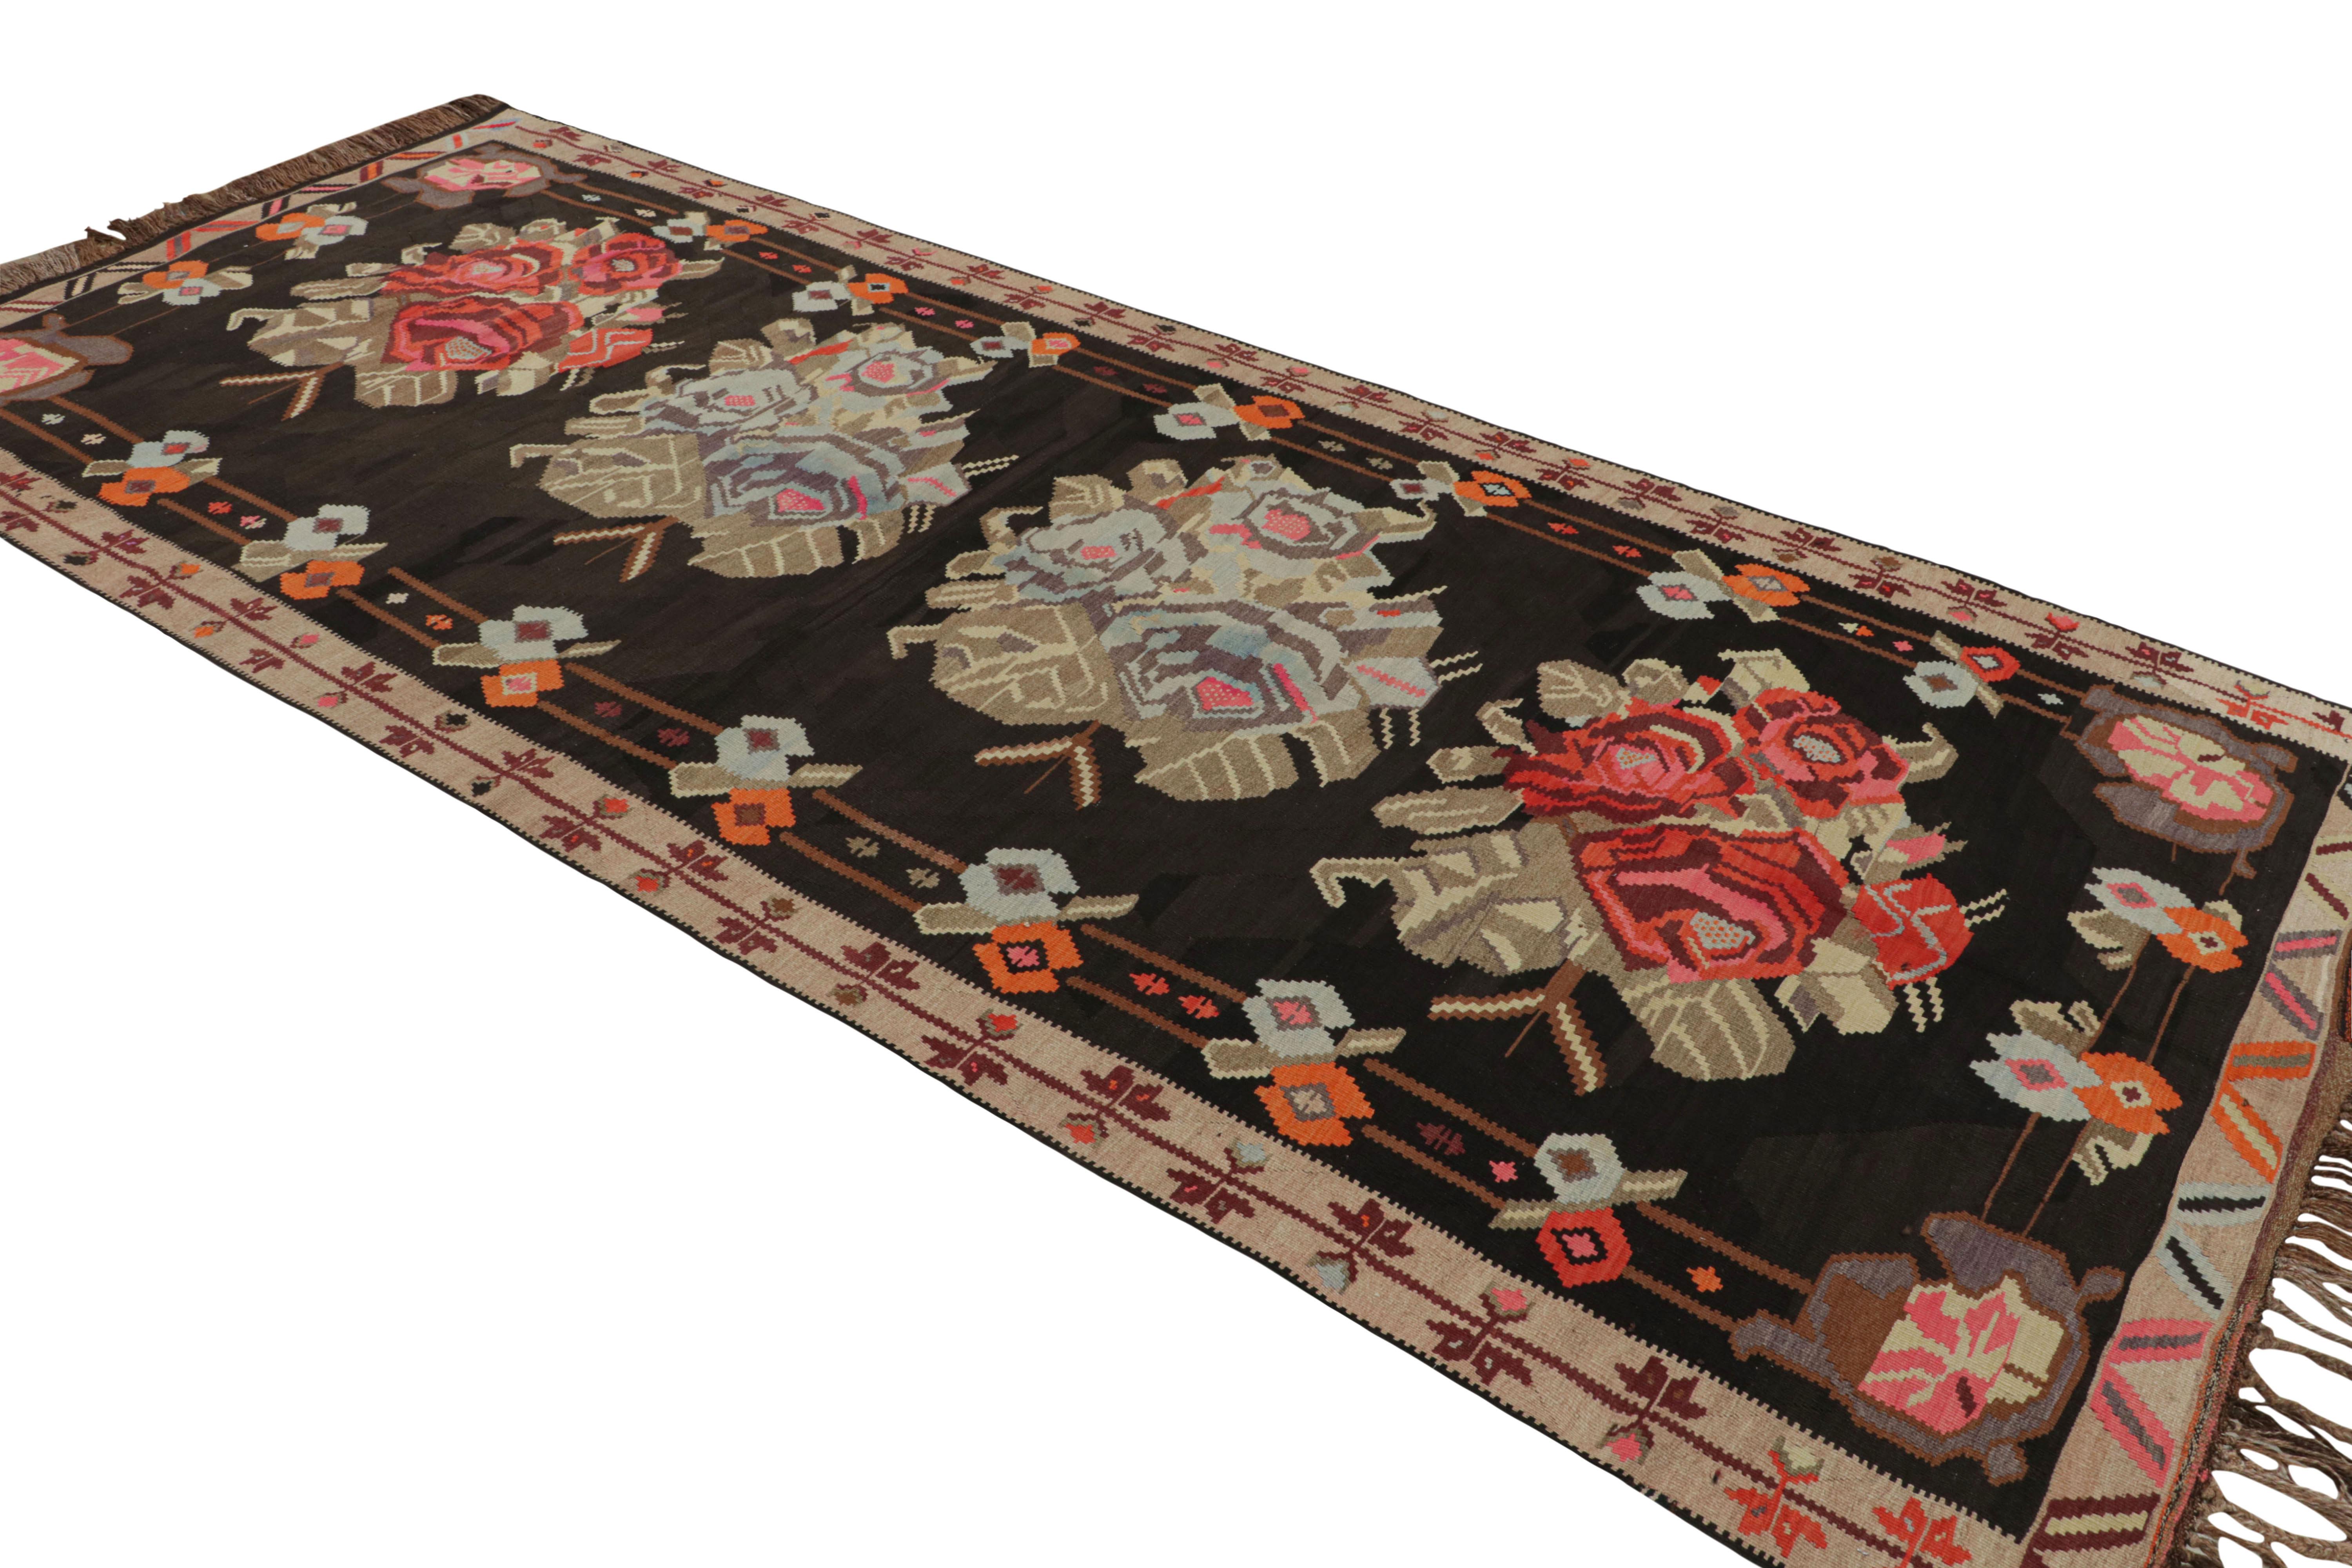 Midcentury Bessarabian Kilim Black Beige Red Floral Turkish Rug by Rug & Kilim In Good Condition For Sale In Long Island City, NY